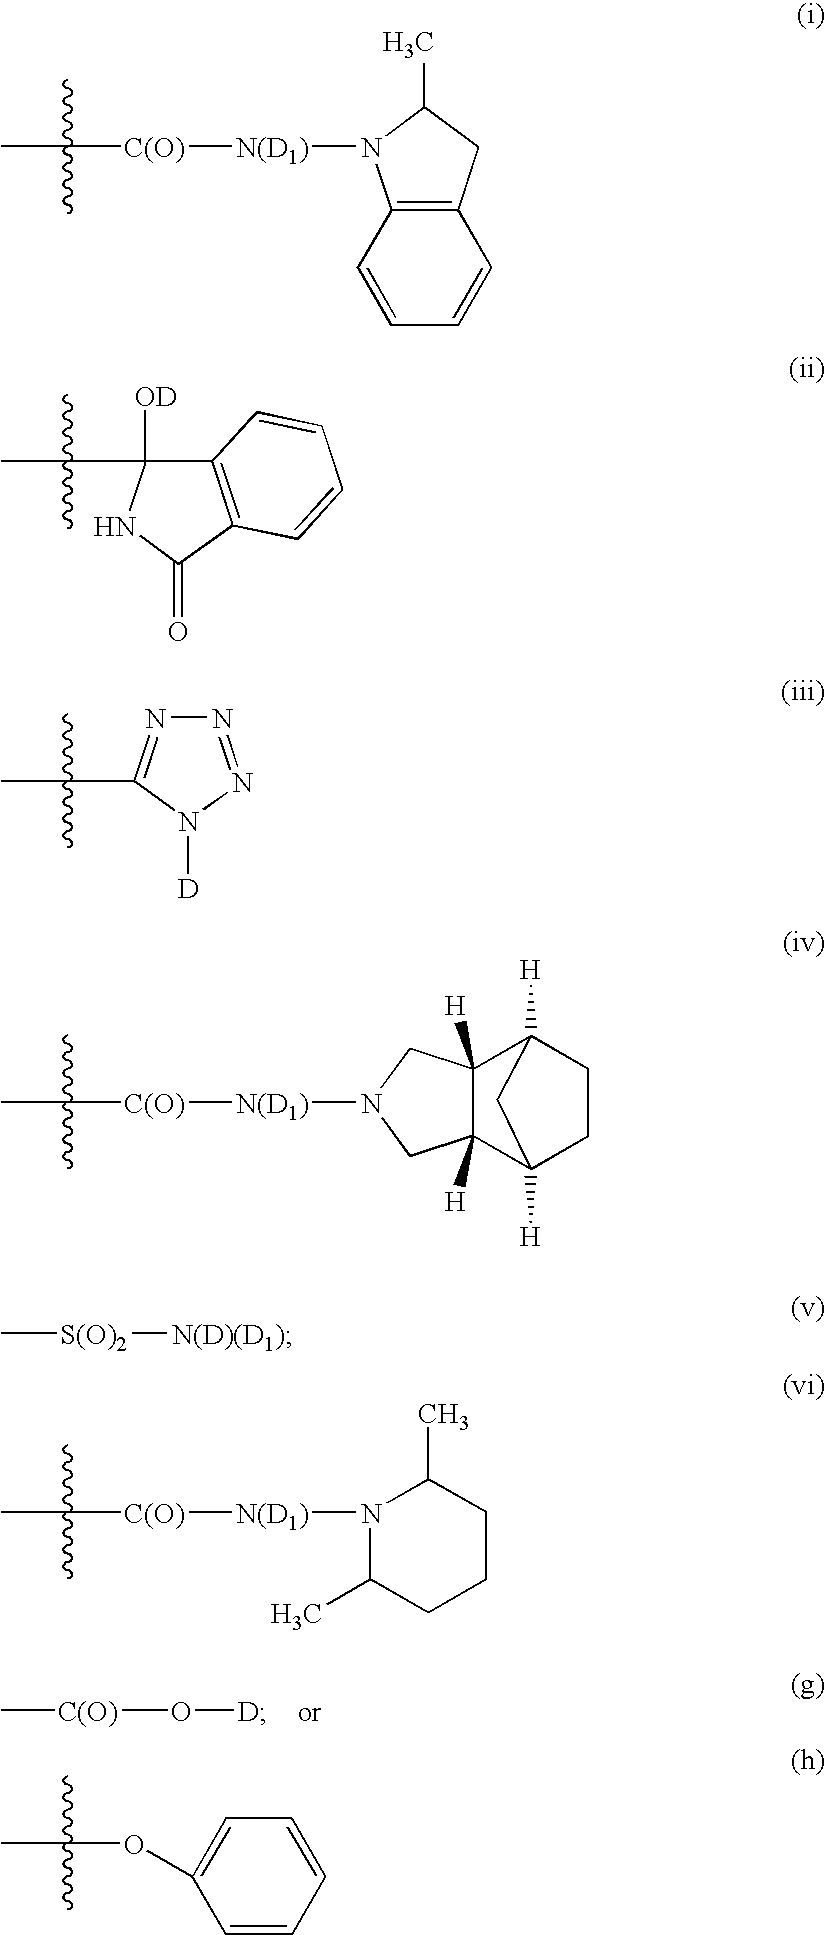 Nitrosated and nitrosylated diuretic compounds, compositions and methods of use